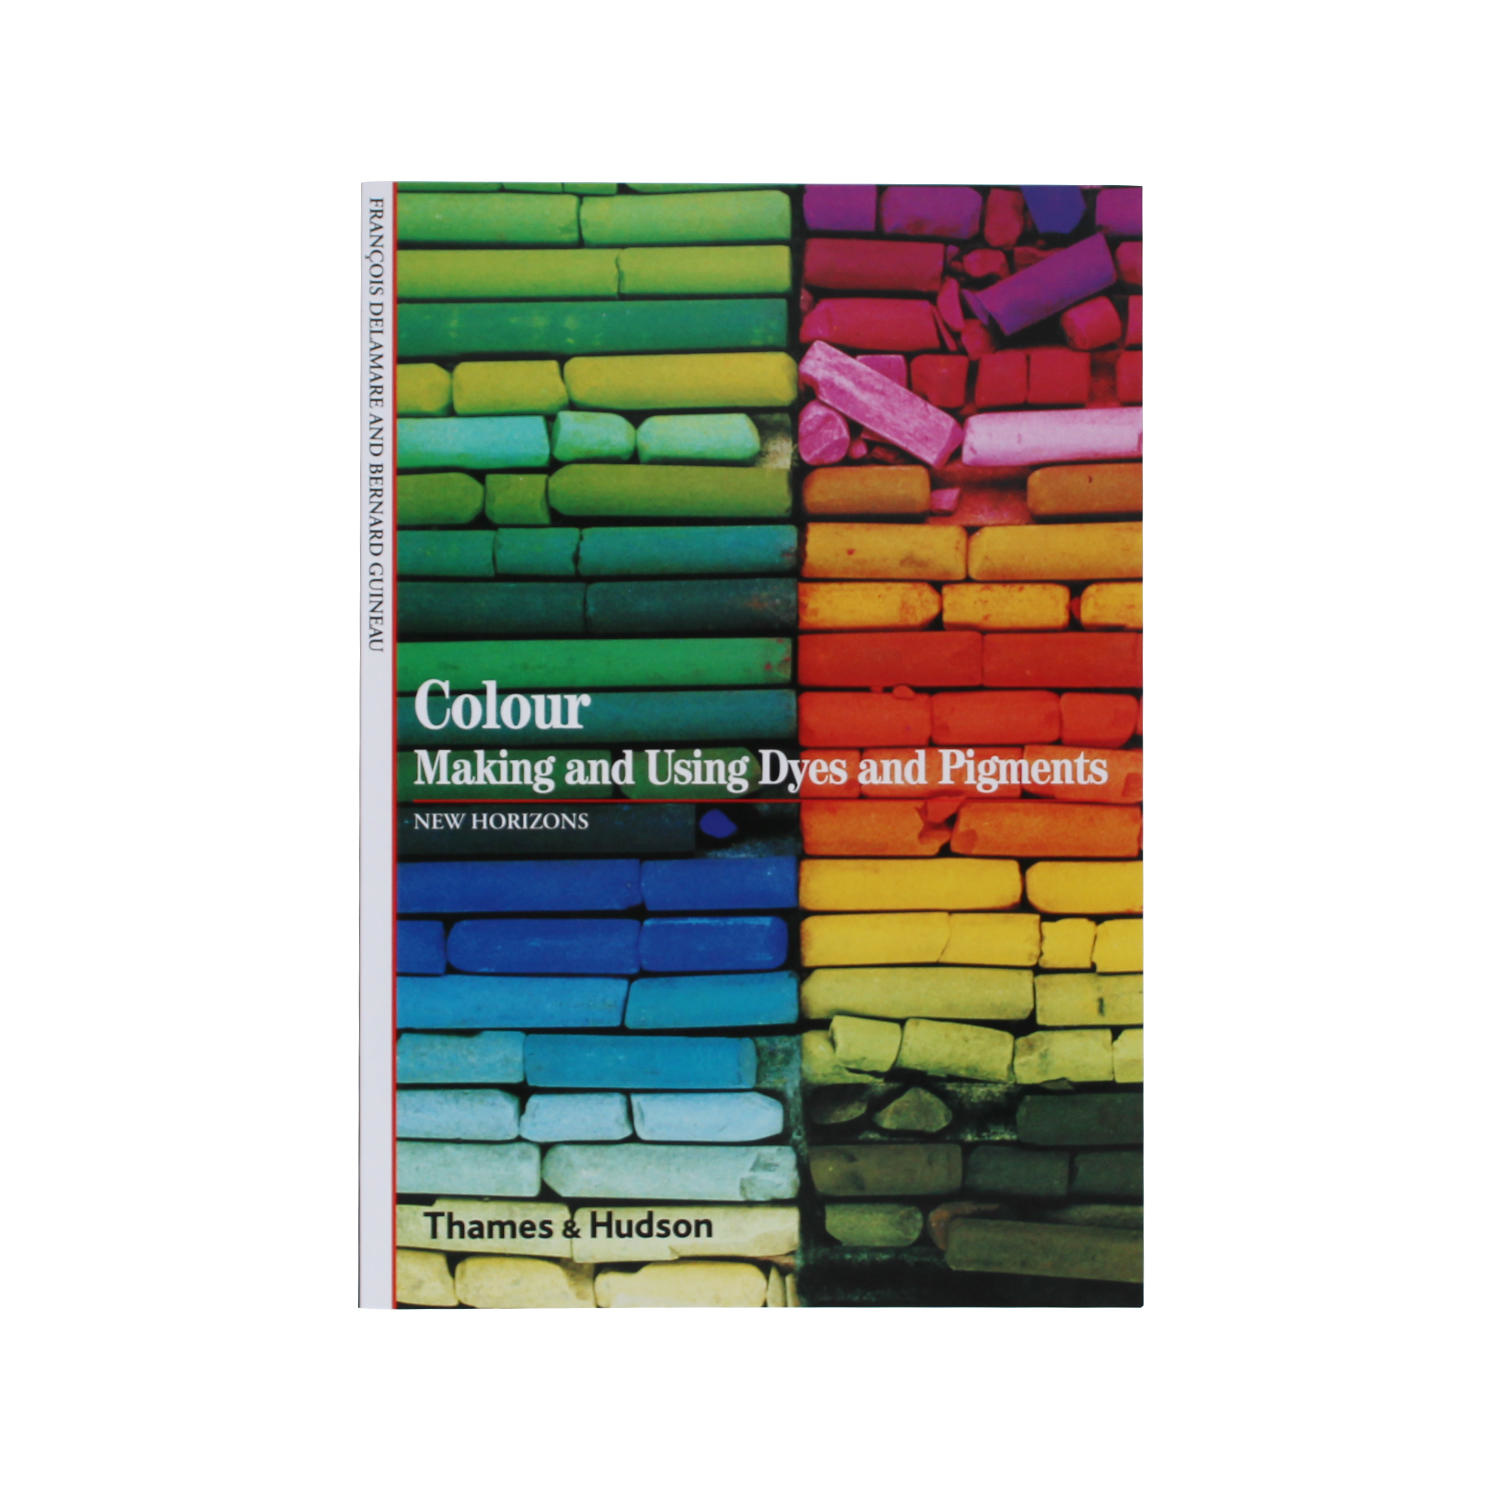 Colour. Making and using dyes and pigments